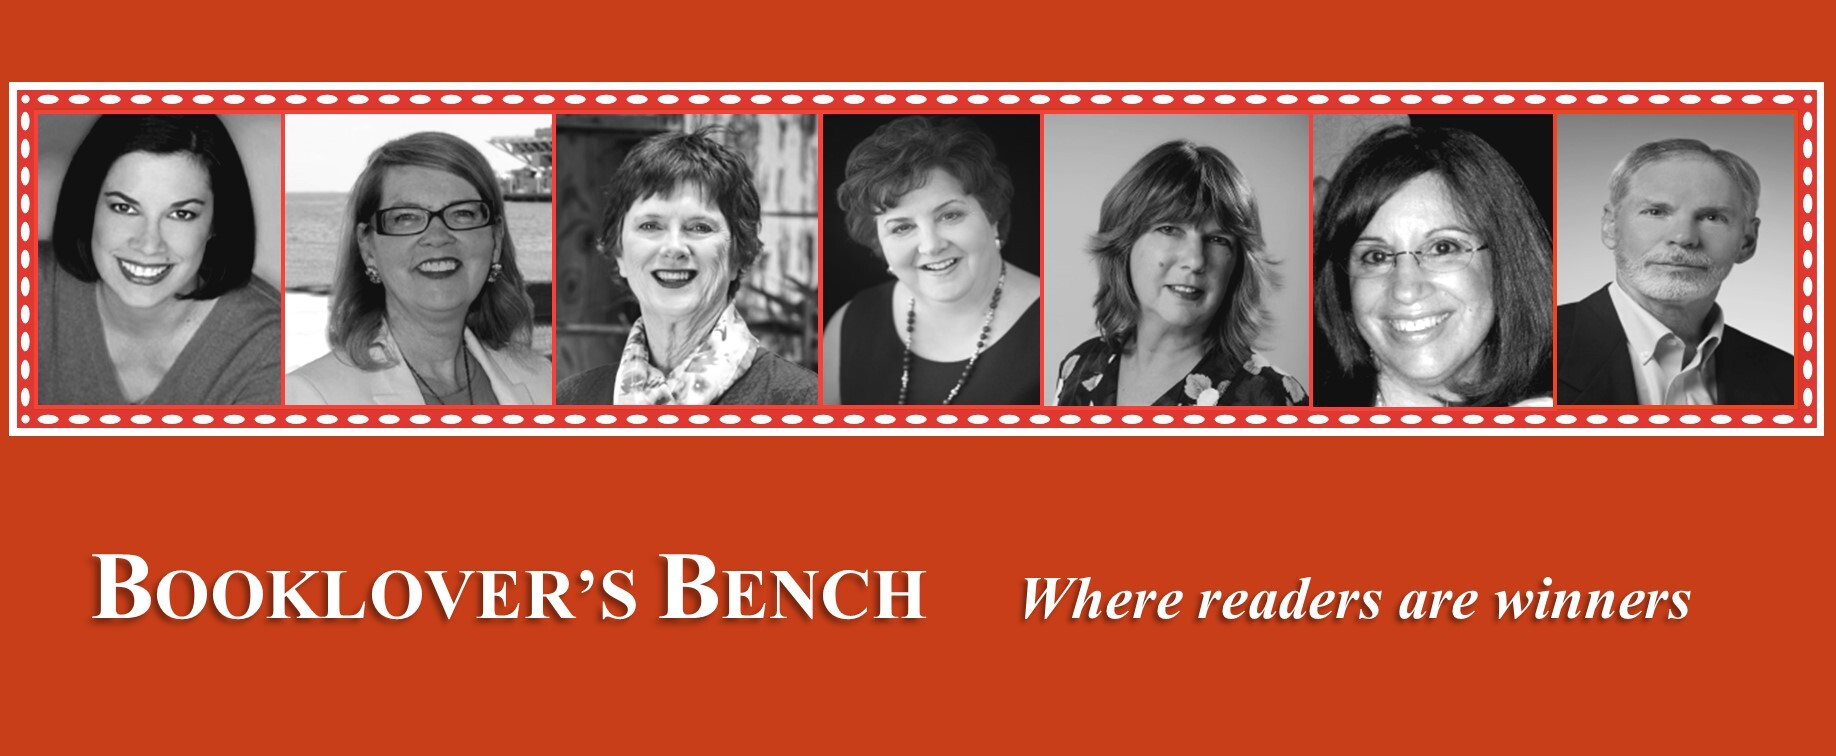 author research stories from the Booklovers Bench authors